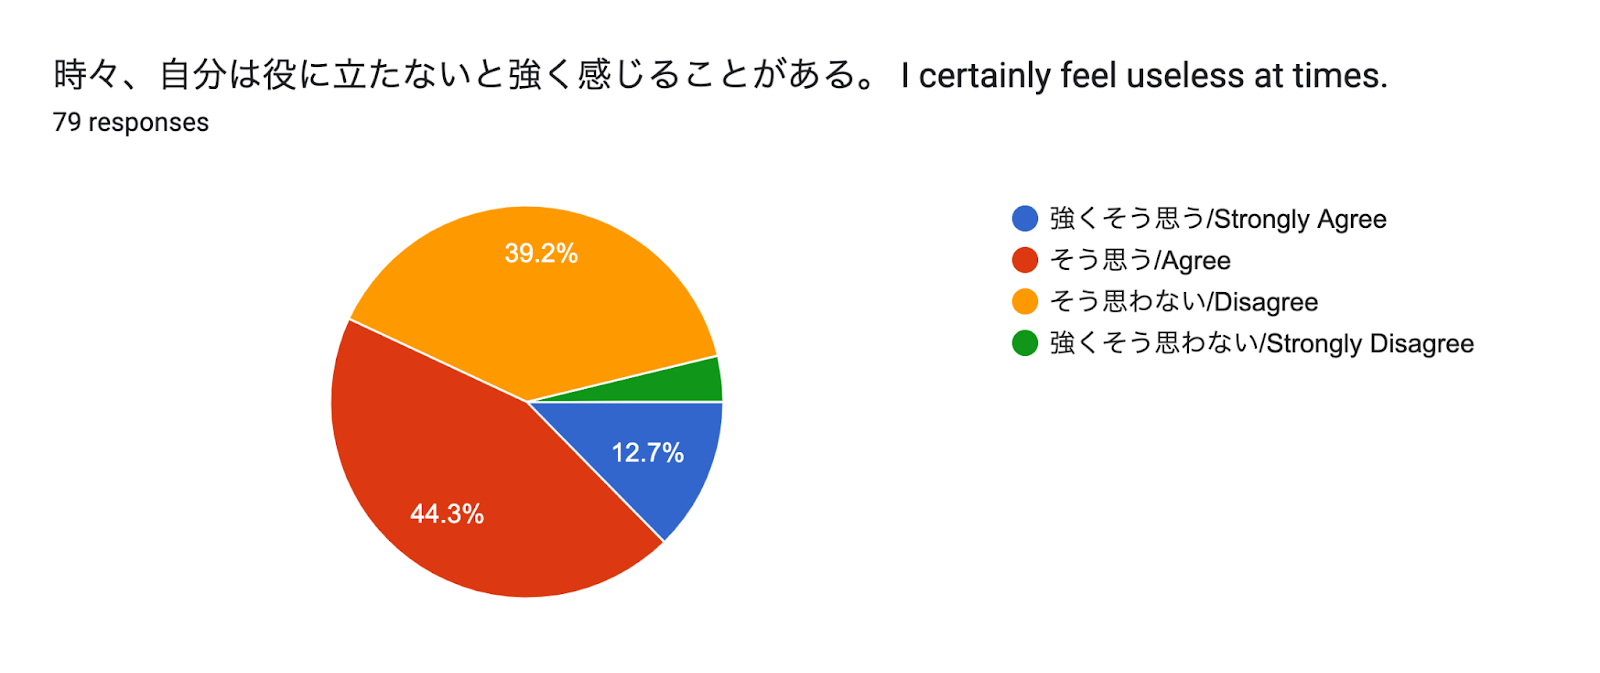 Forms response chart. Question title: 時々、自分は役に立たないと強く感じることがある。
I certainly feel useless at times.
. Number of responses: 79 responses.